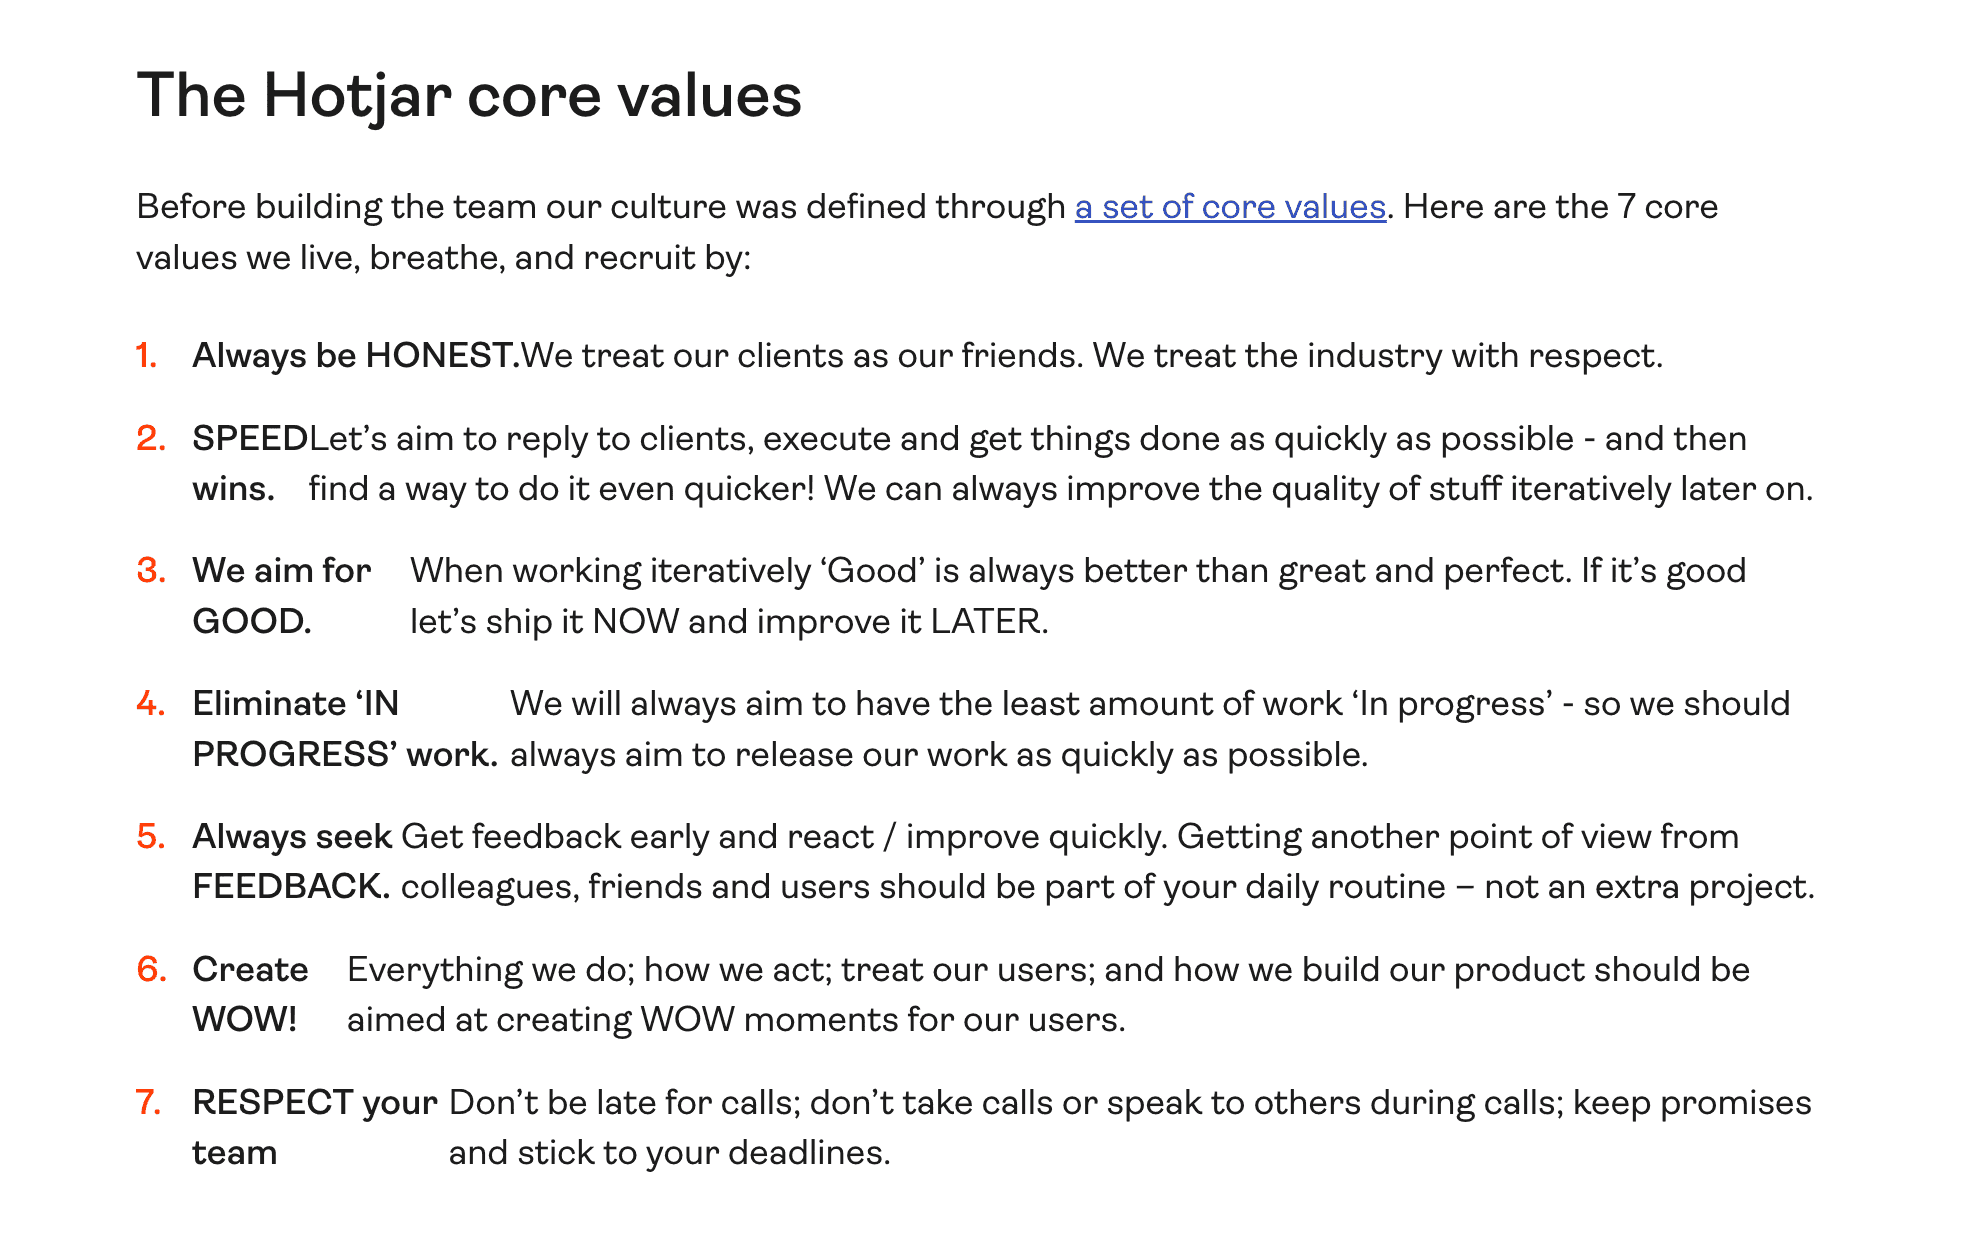 List of "Hotjar"'s core values. Before building the team, our culture was definted through a set of core values. Here are the 7 core values we live breath and recruit by: Honesty, Speed, Aim for good, Eliminate 'in progress', Feedback, Create WOW, Respect your team